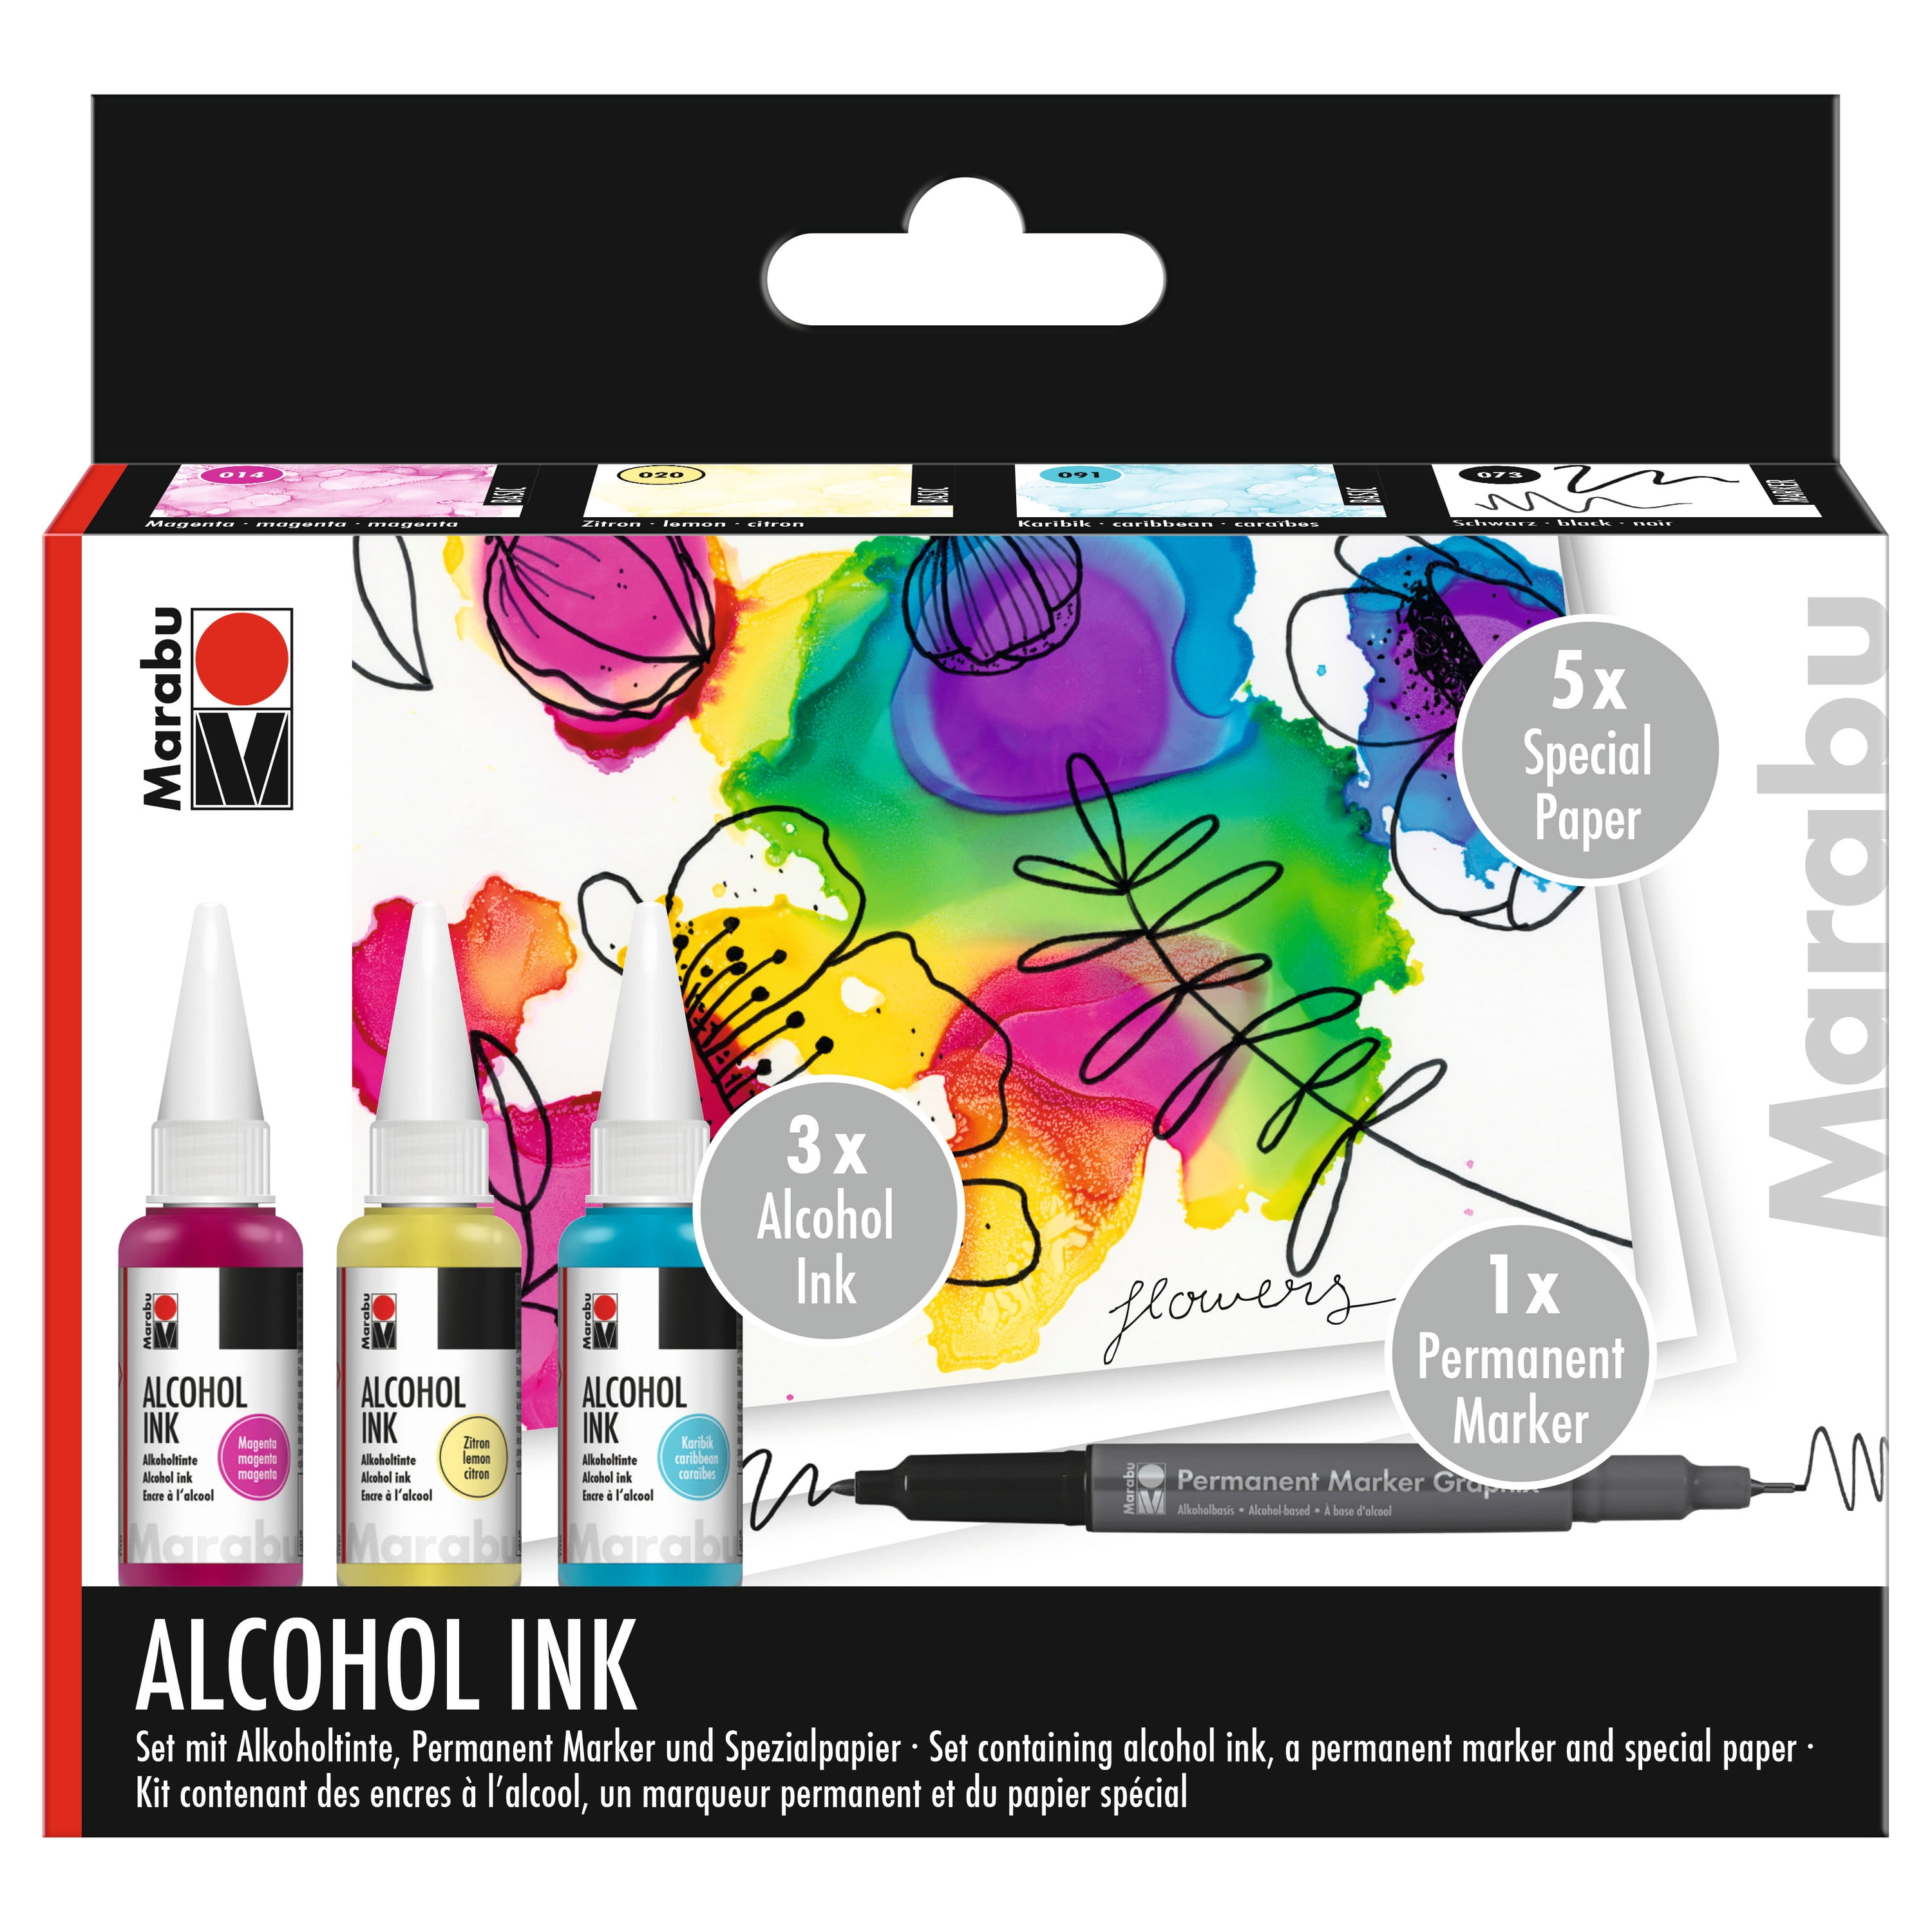 Alcohol inK – Resin24